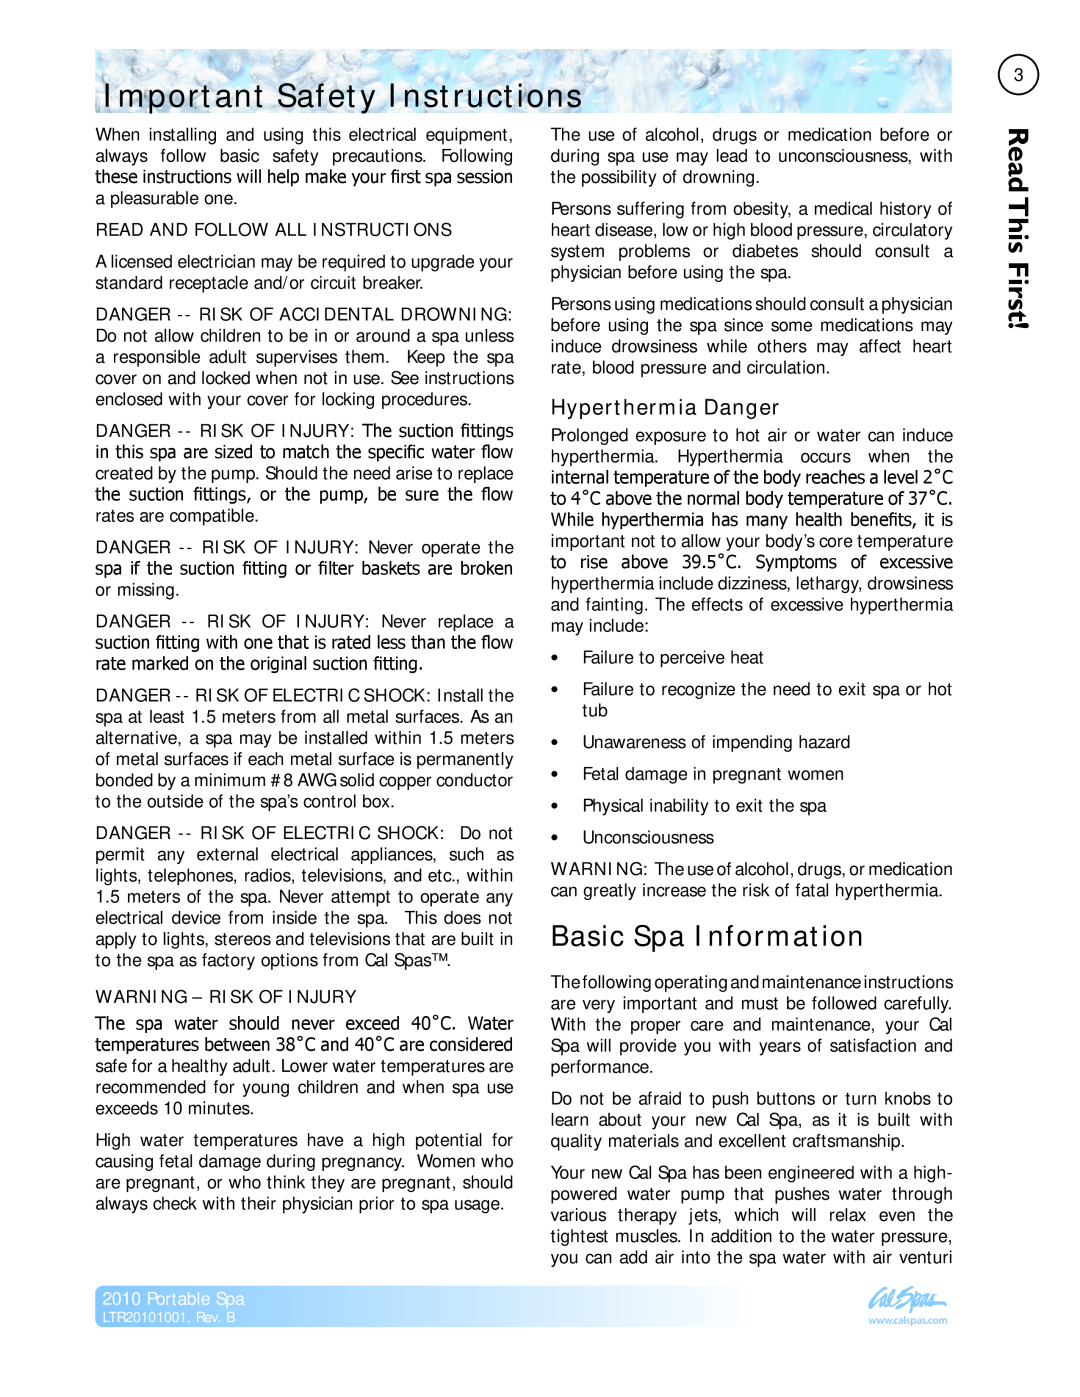 Cal Spas LTR20101001 manual Important Safety Instructions, Basic Spa Information, Read This First, Hyperthermia Danger 